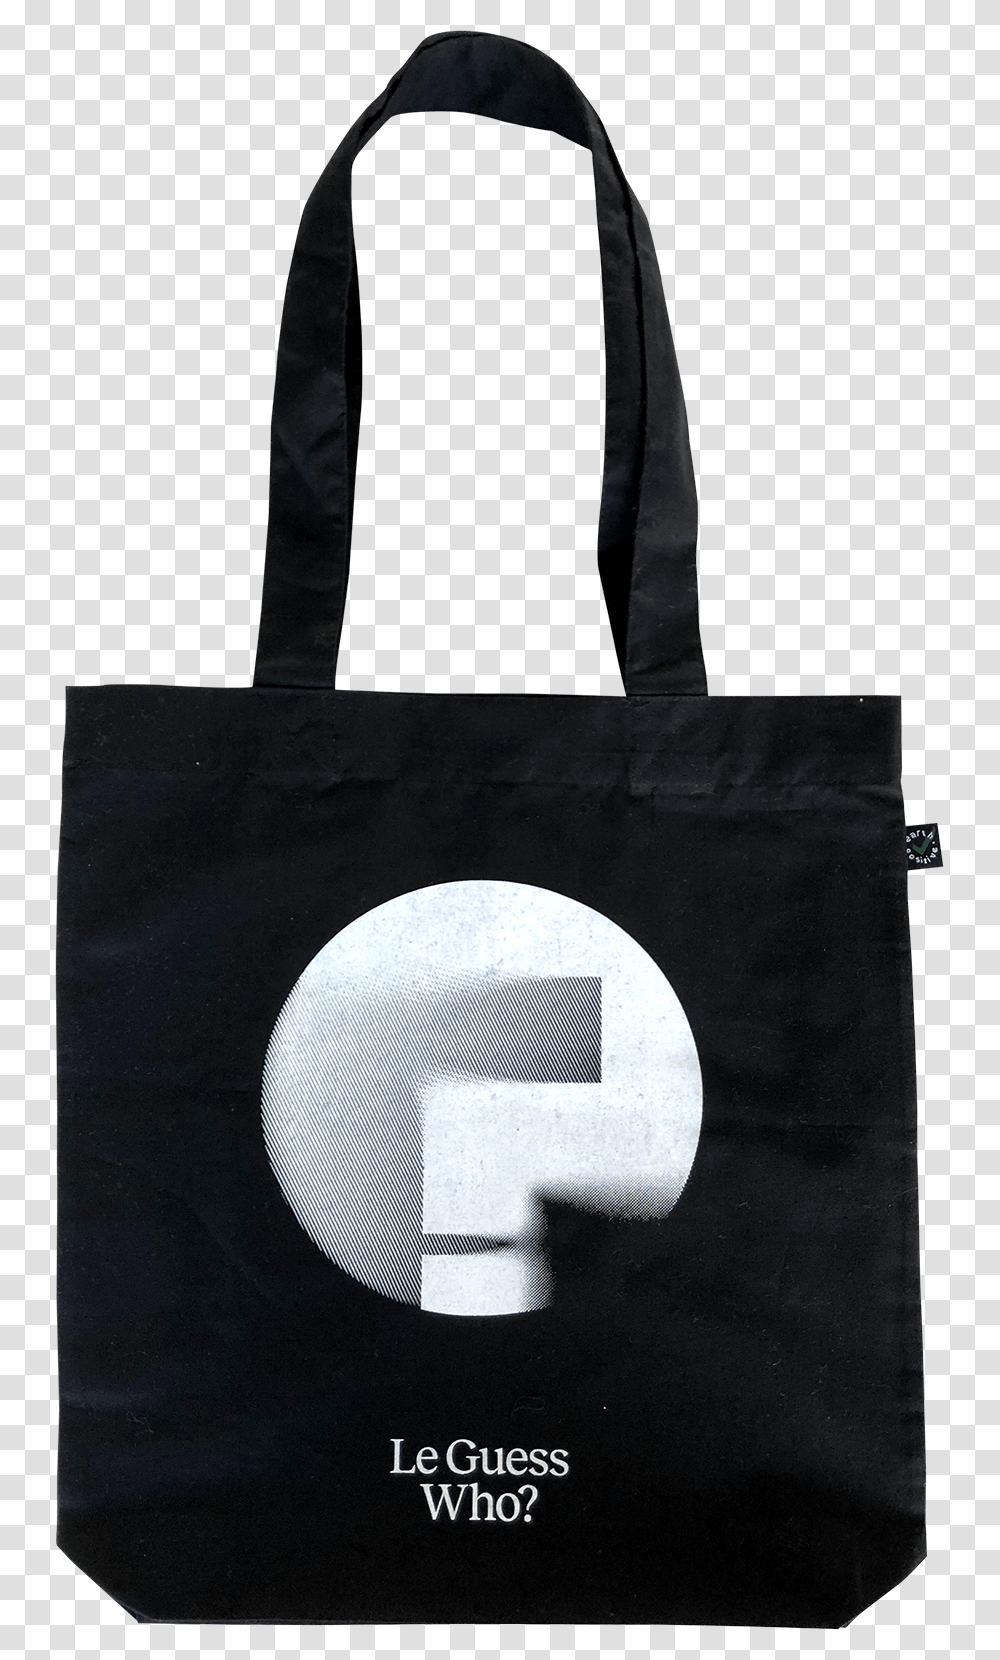 Image Of Le Guess Who 2019 Tote Bag Tote Bag, Shopping Bag Transparent Png